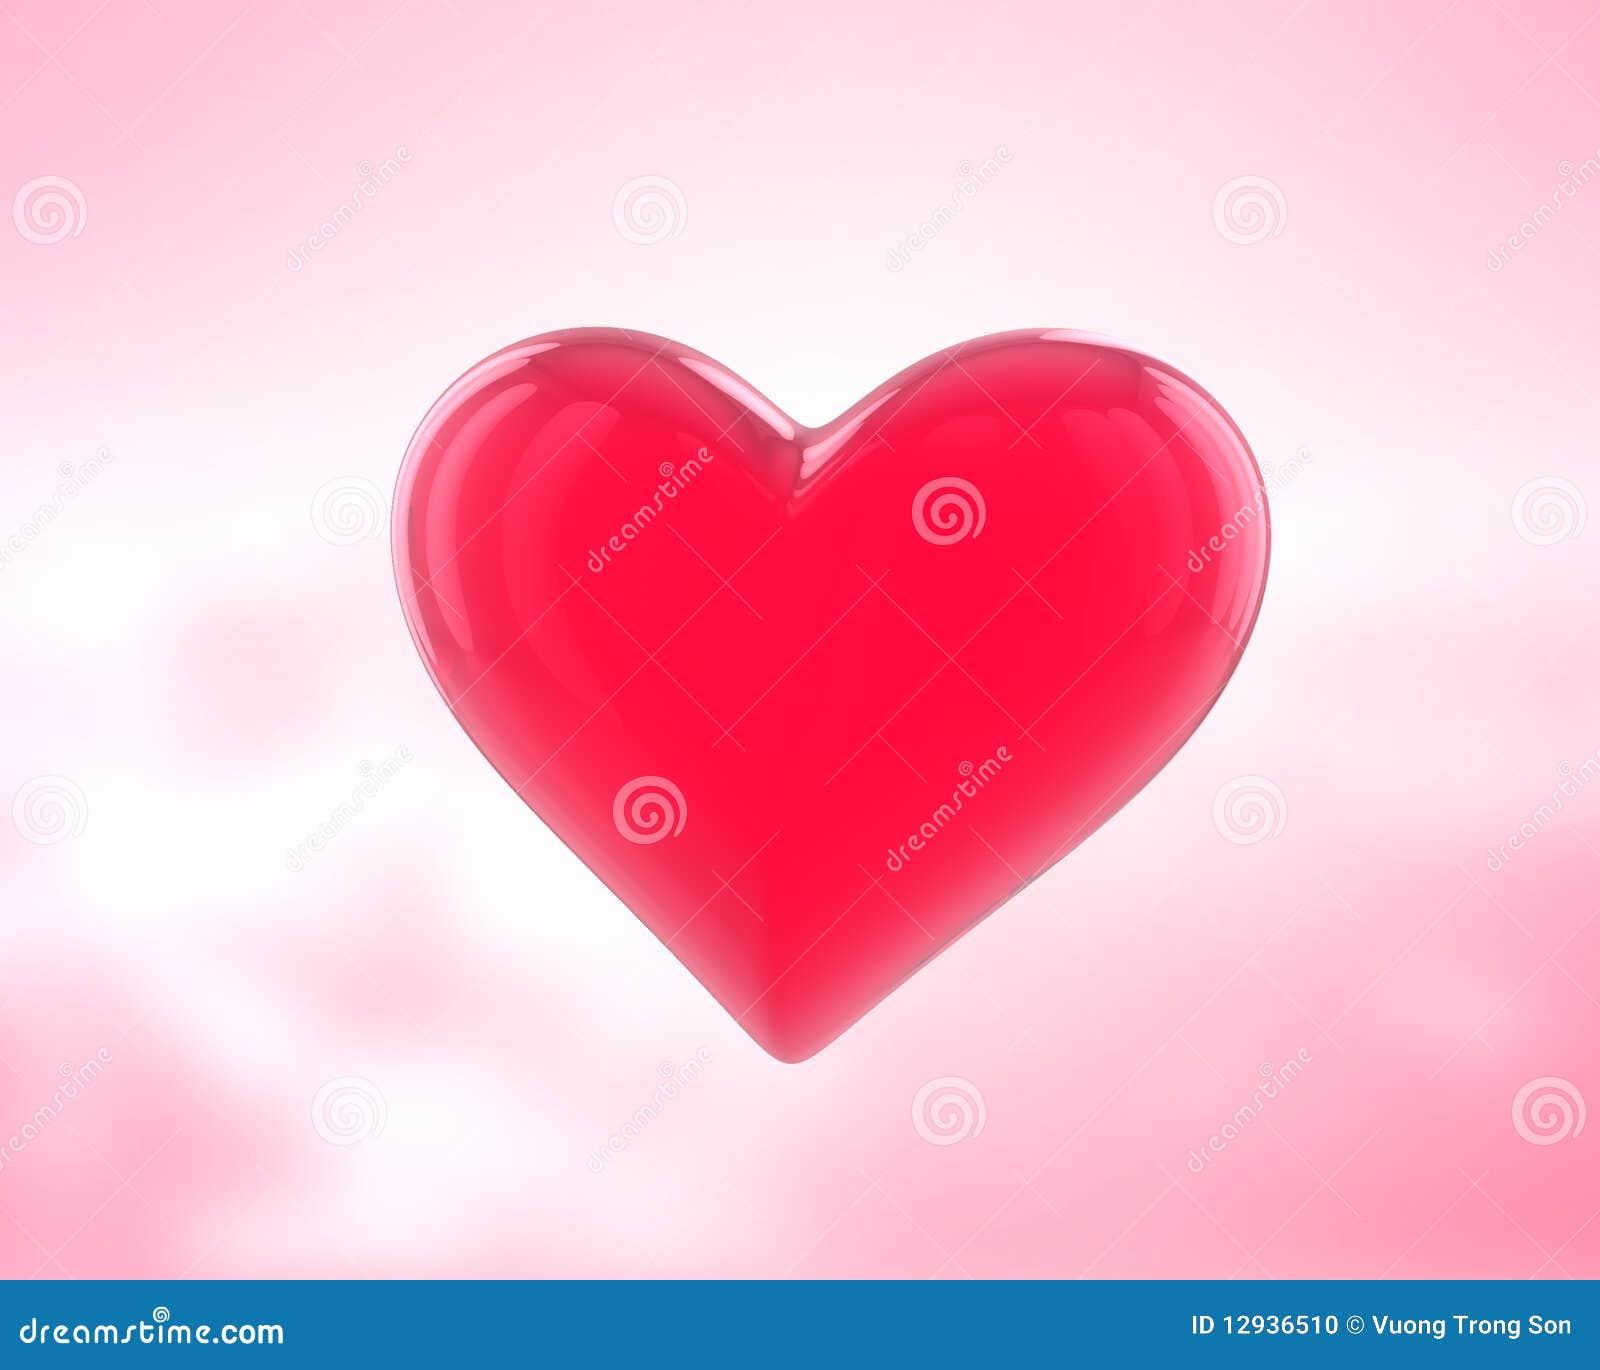 Image result for pretty hearts